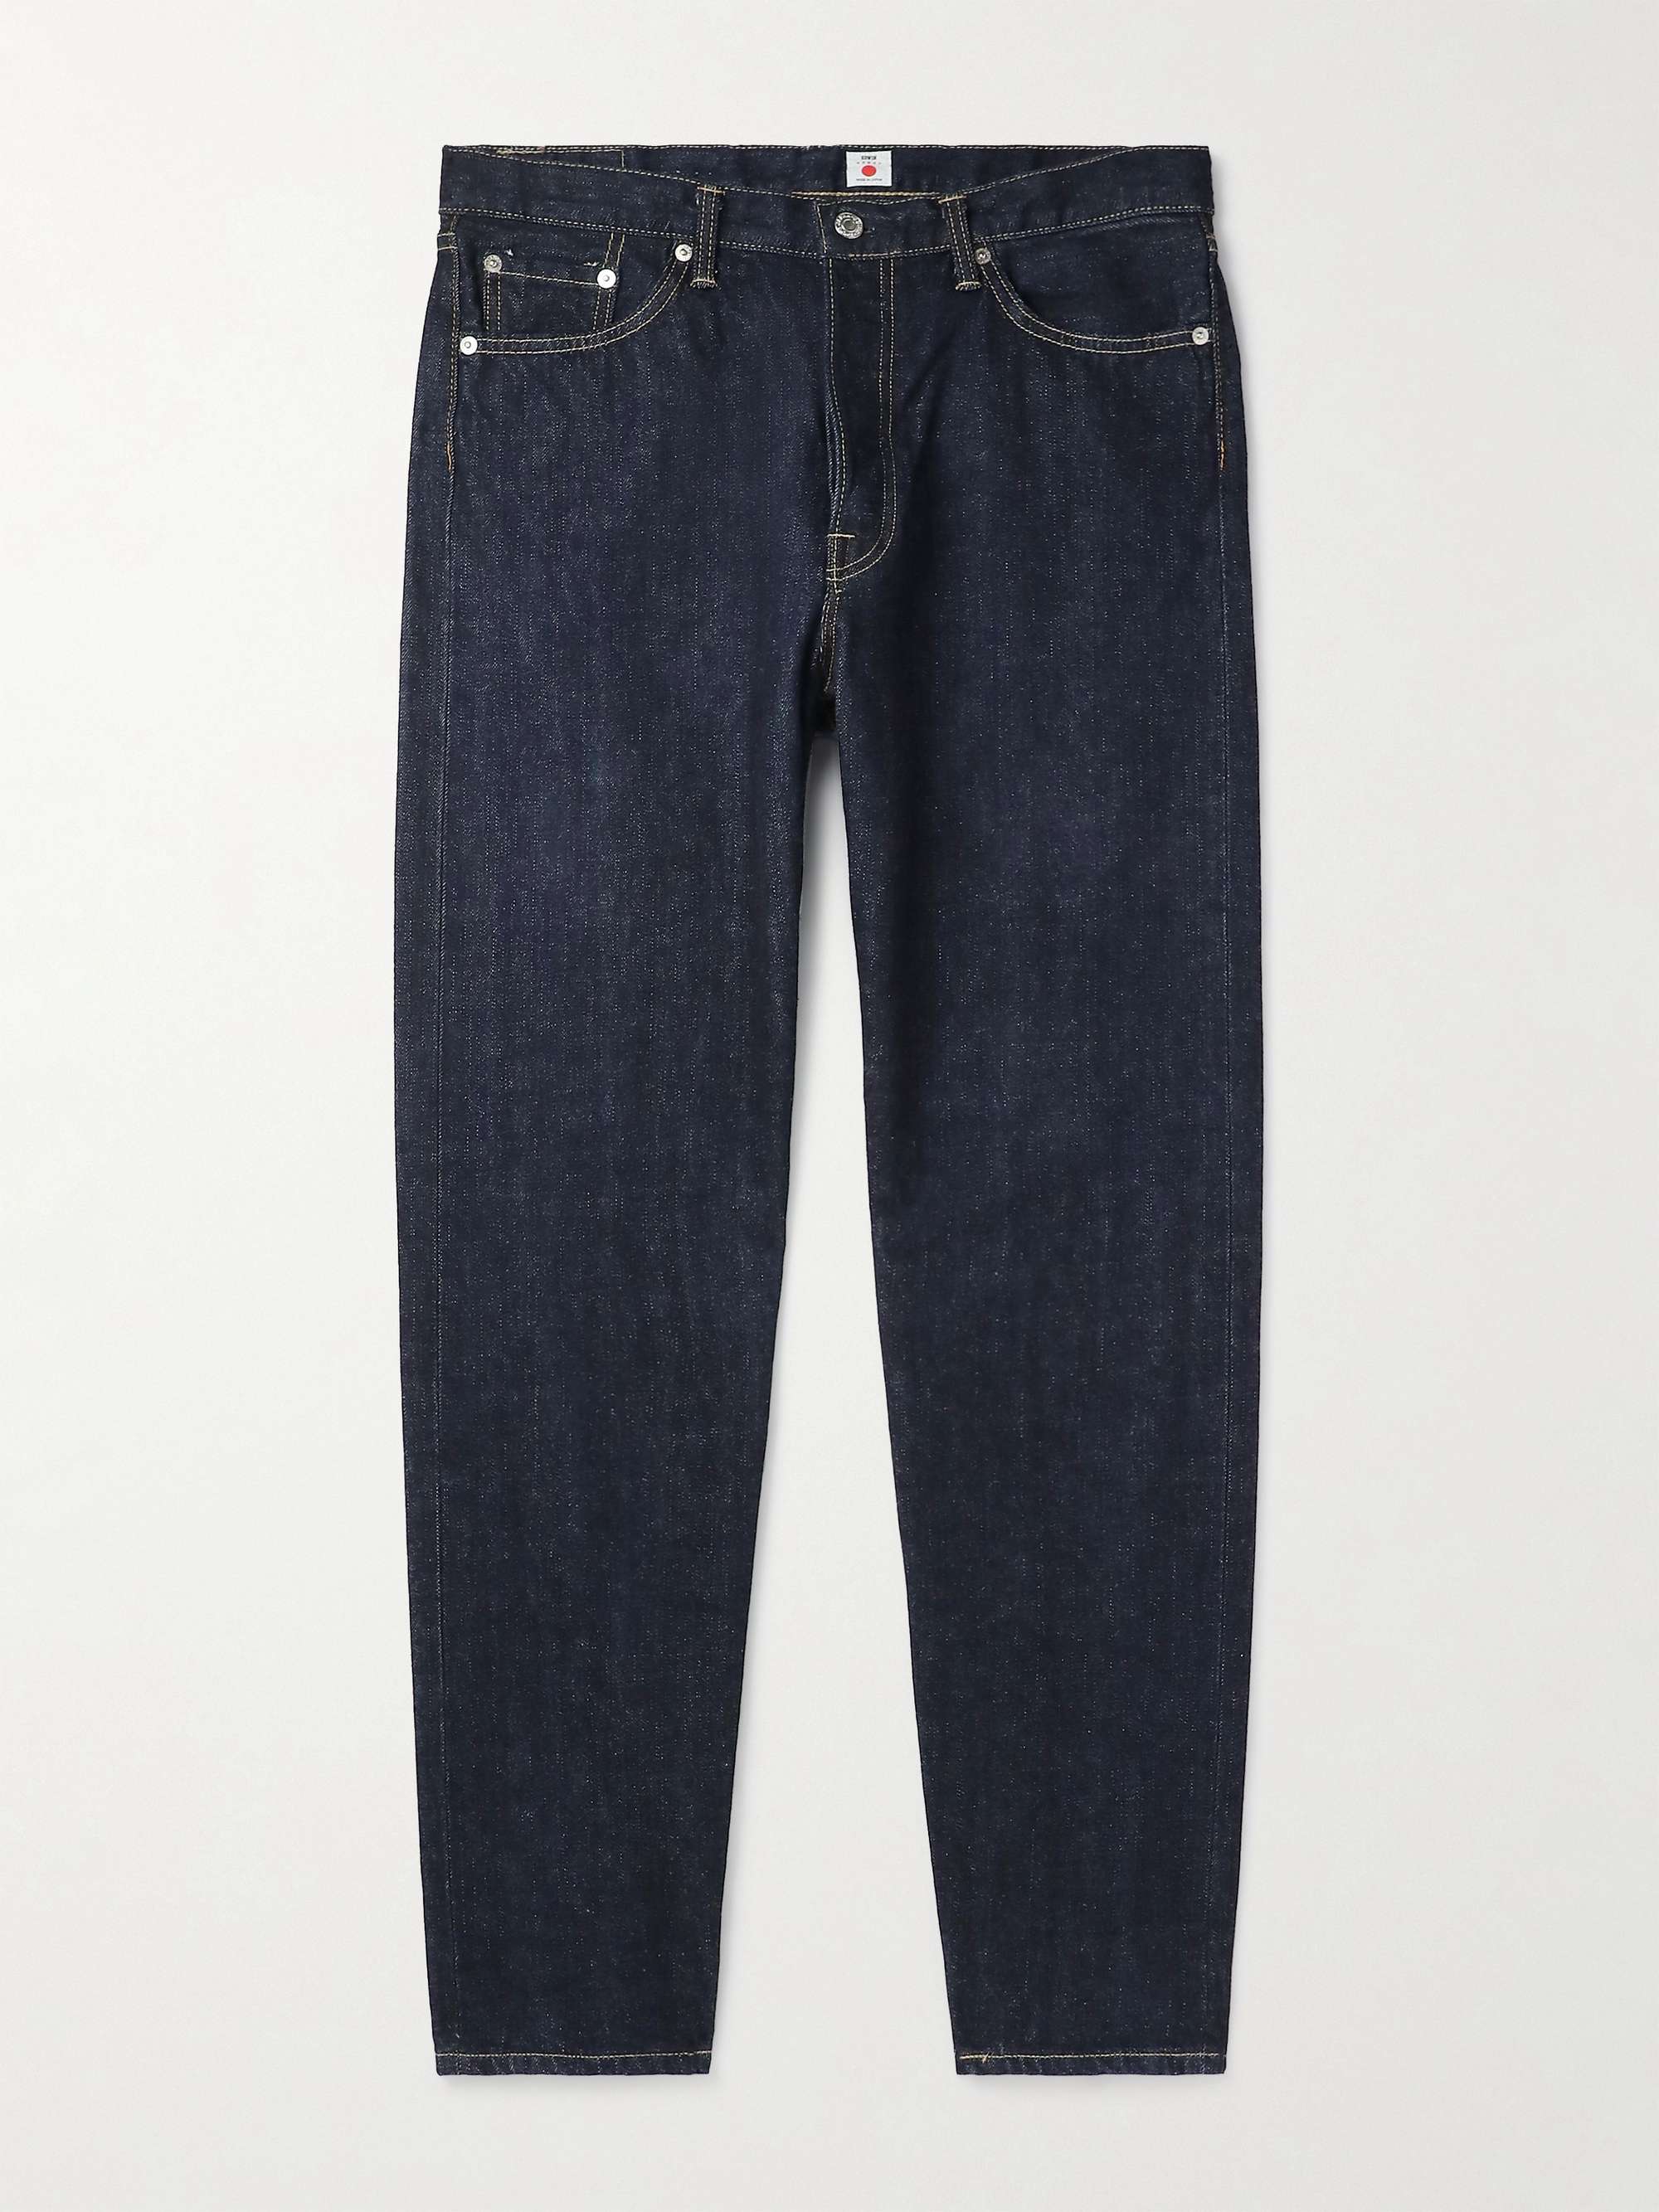 EDWIN Tapered Recycled Selvedge | MR PORTER